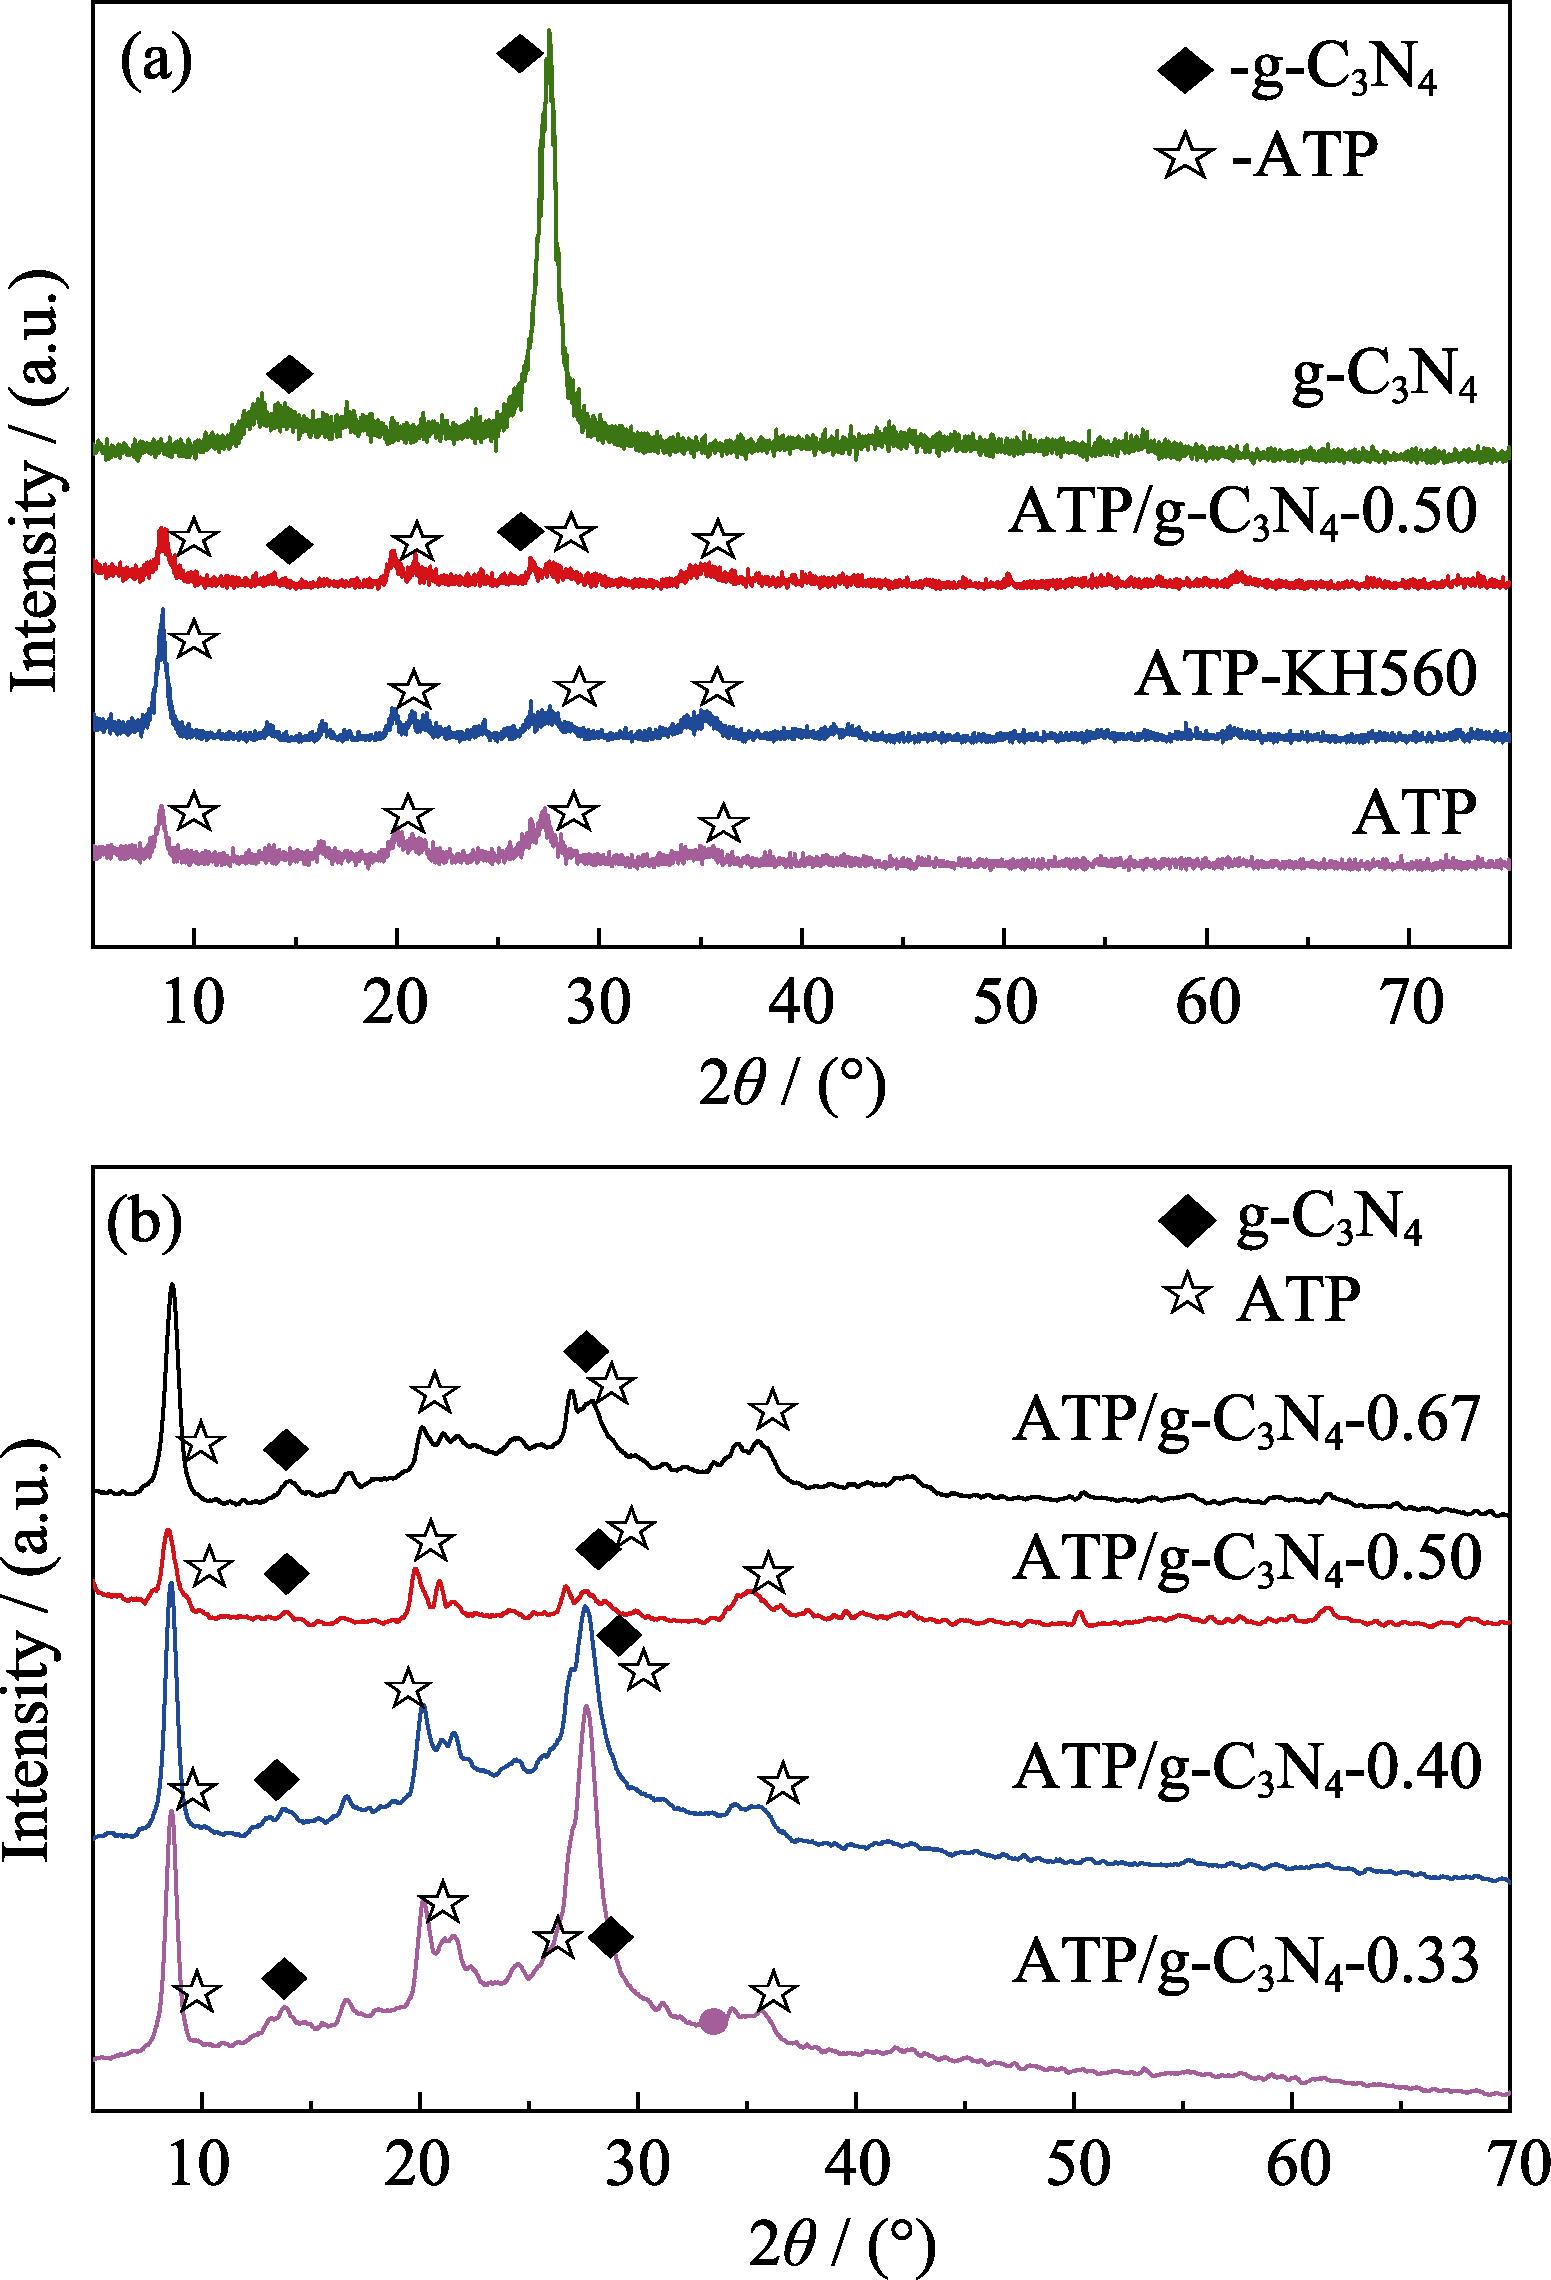 XRD patterns of different catalysts (a) and ATP/g-C3N4 with different proportions (b)